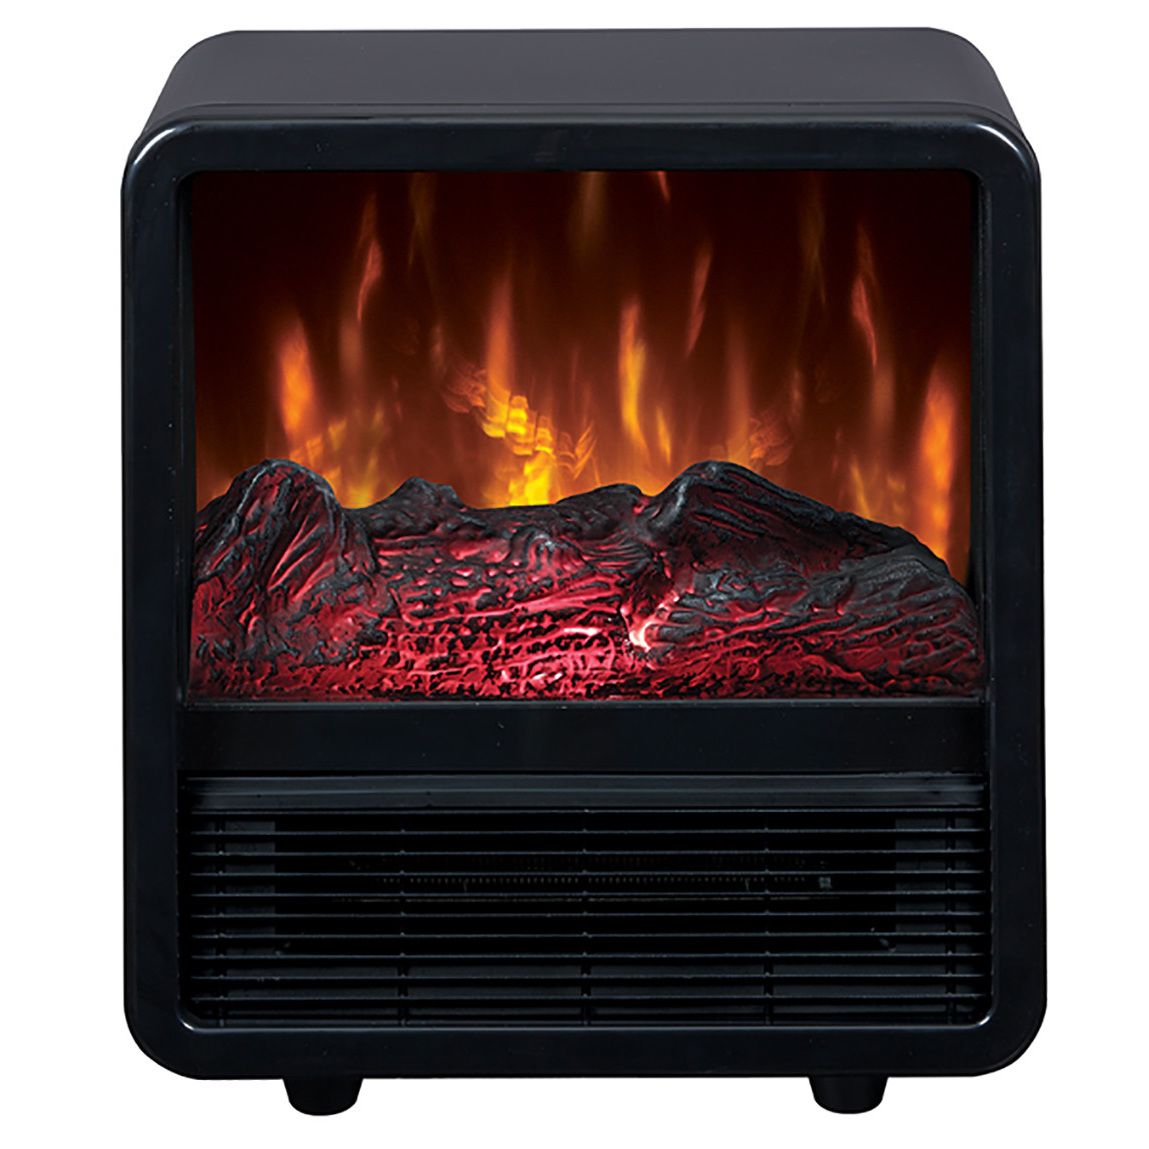 Small Fireplace Heater Elegant Duraflame Cfs 300 Blk Portable Electric Personal Space